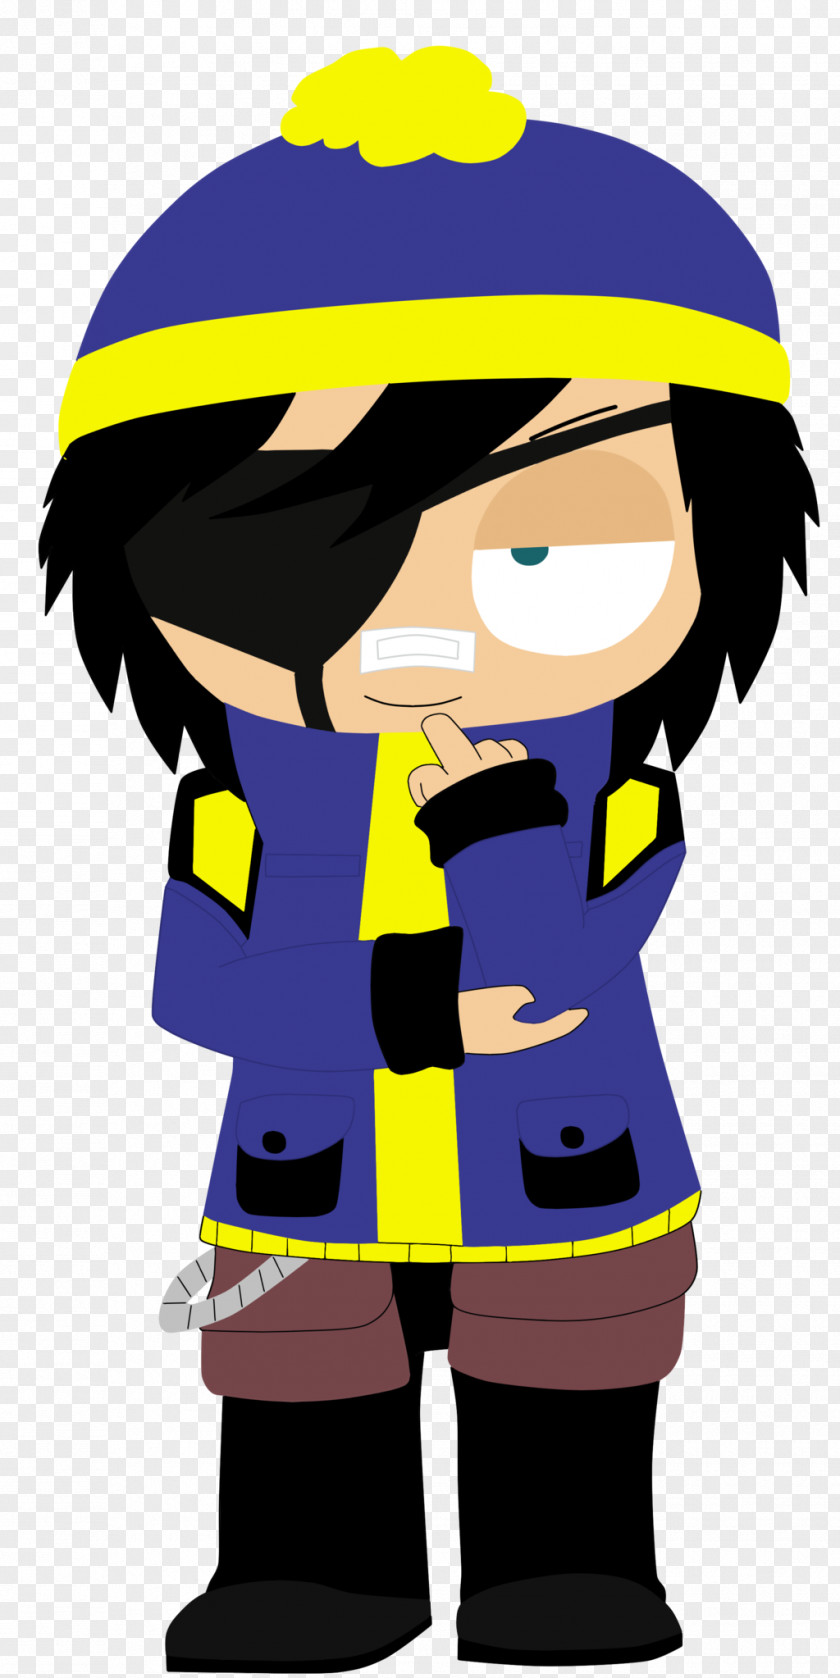 Lovechild Drawing South Park: The Stick Of Truth 19 December Clip Art PNG